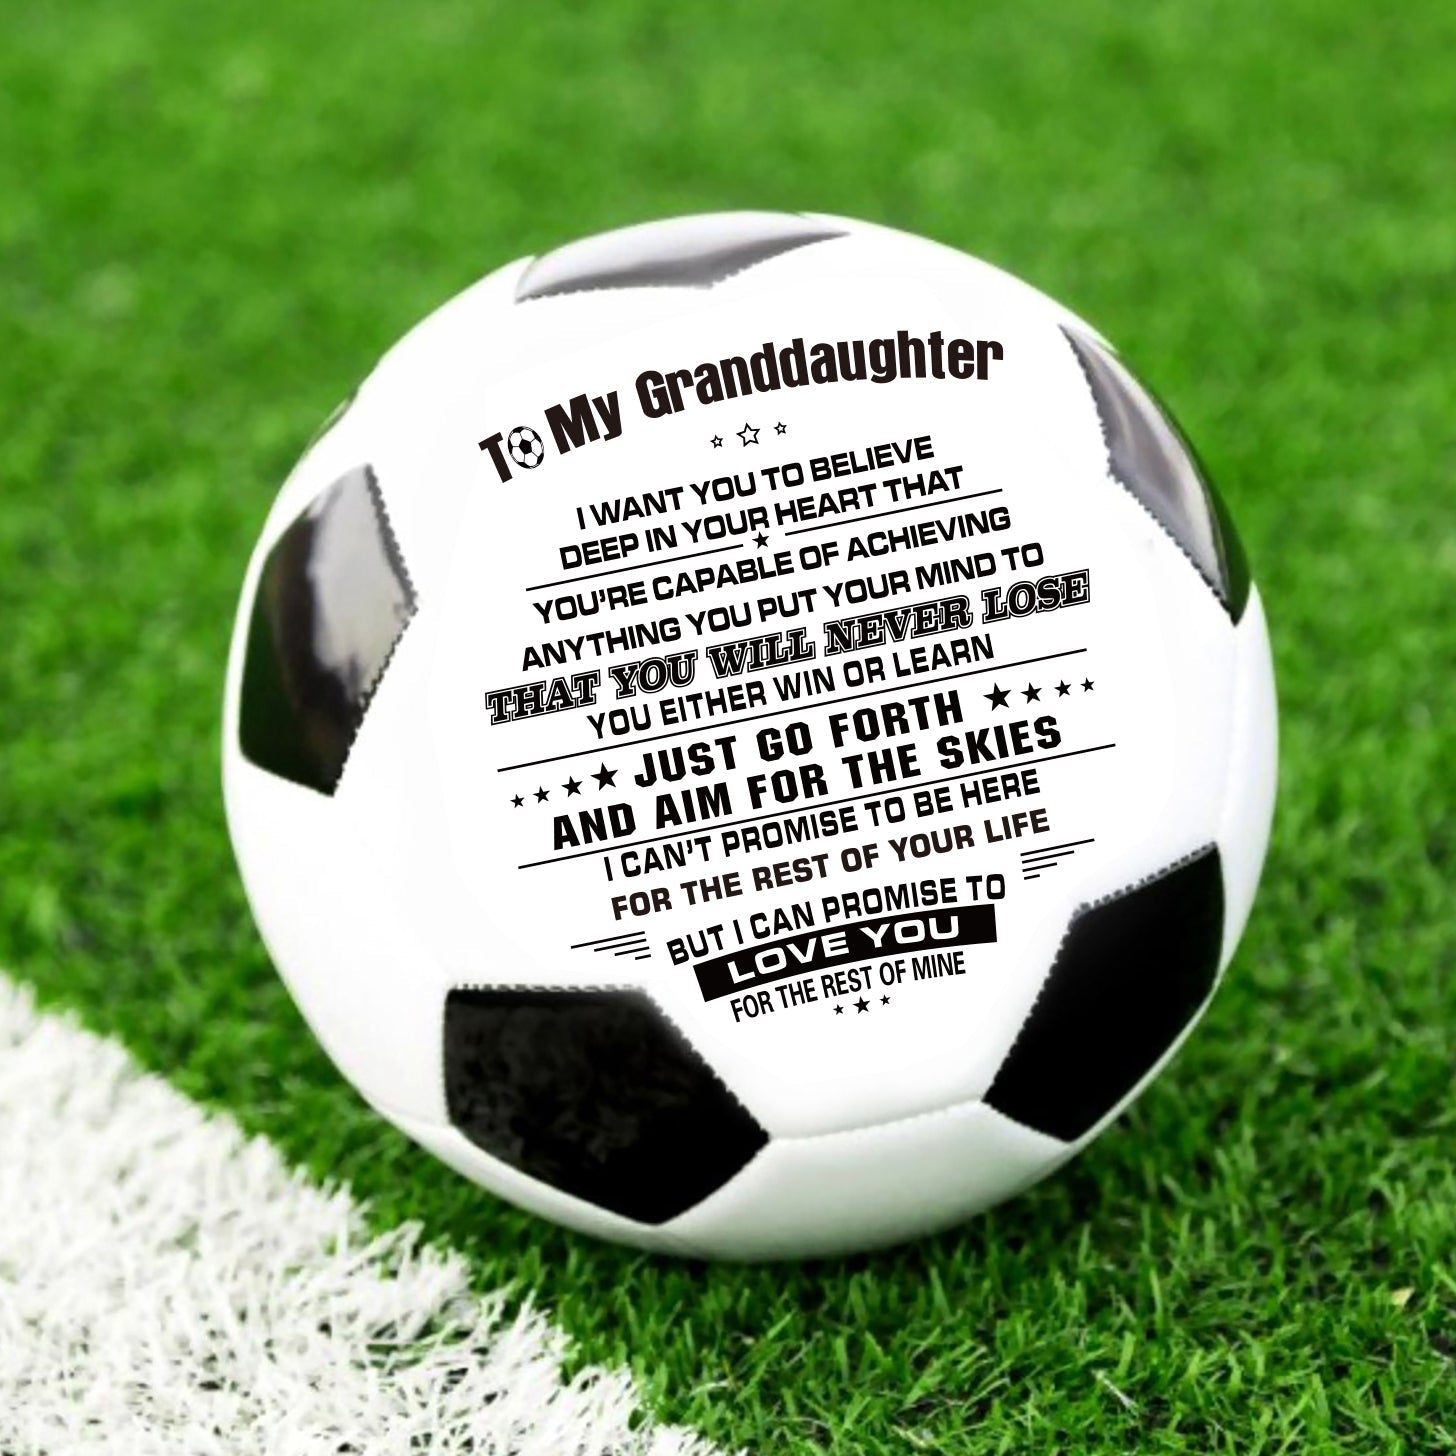 Personalized Printed Soccer Ball Football For My Granddaughter, Birthday Christmas Graduation Gift For Granddaughter, Perfect For Outdoor & Indoor Match Or Game，Size 5 - Family Watchs